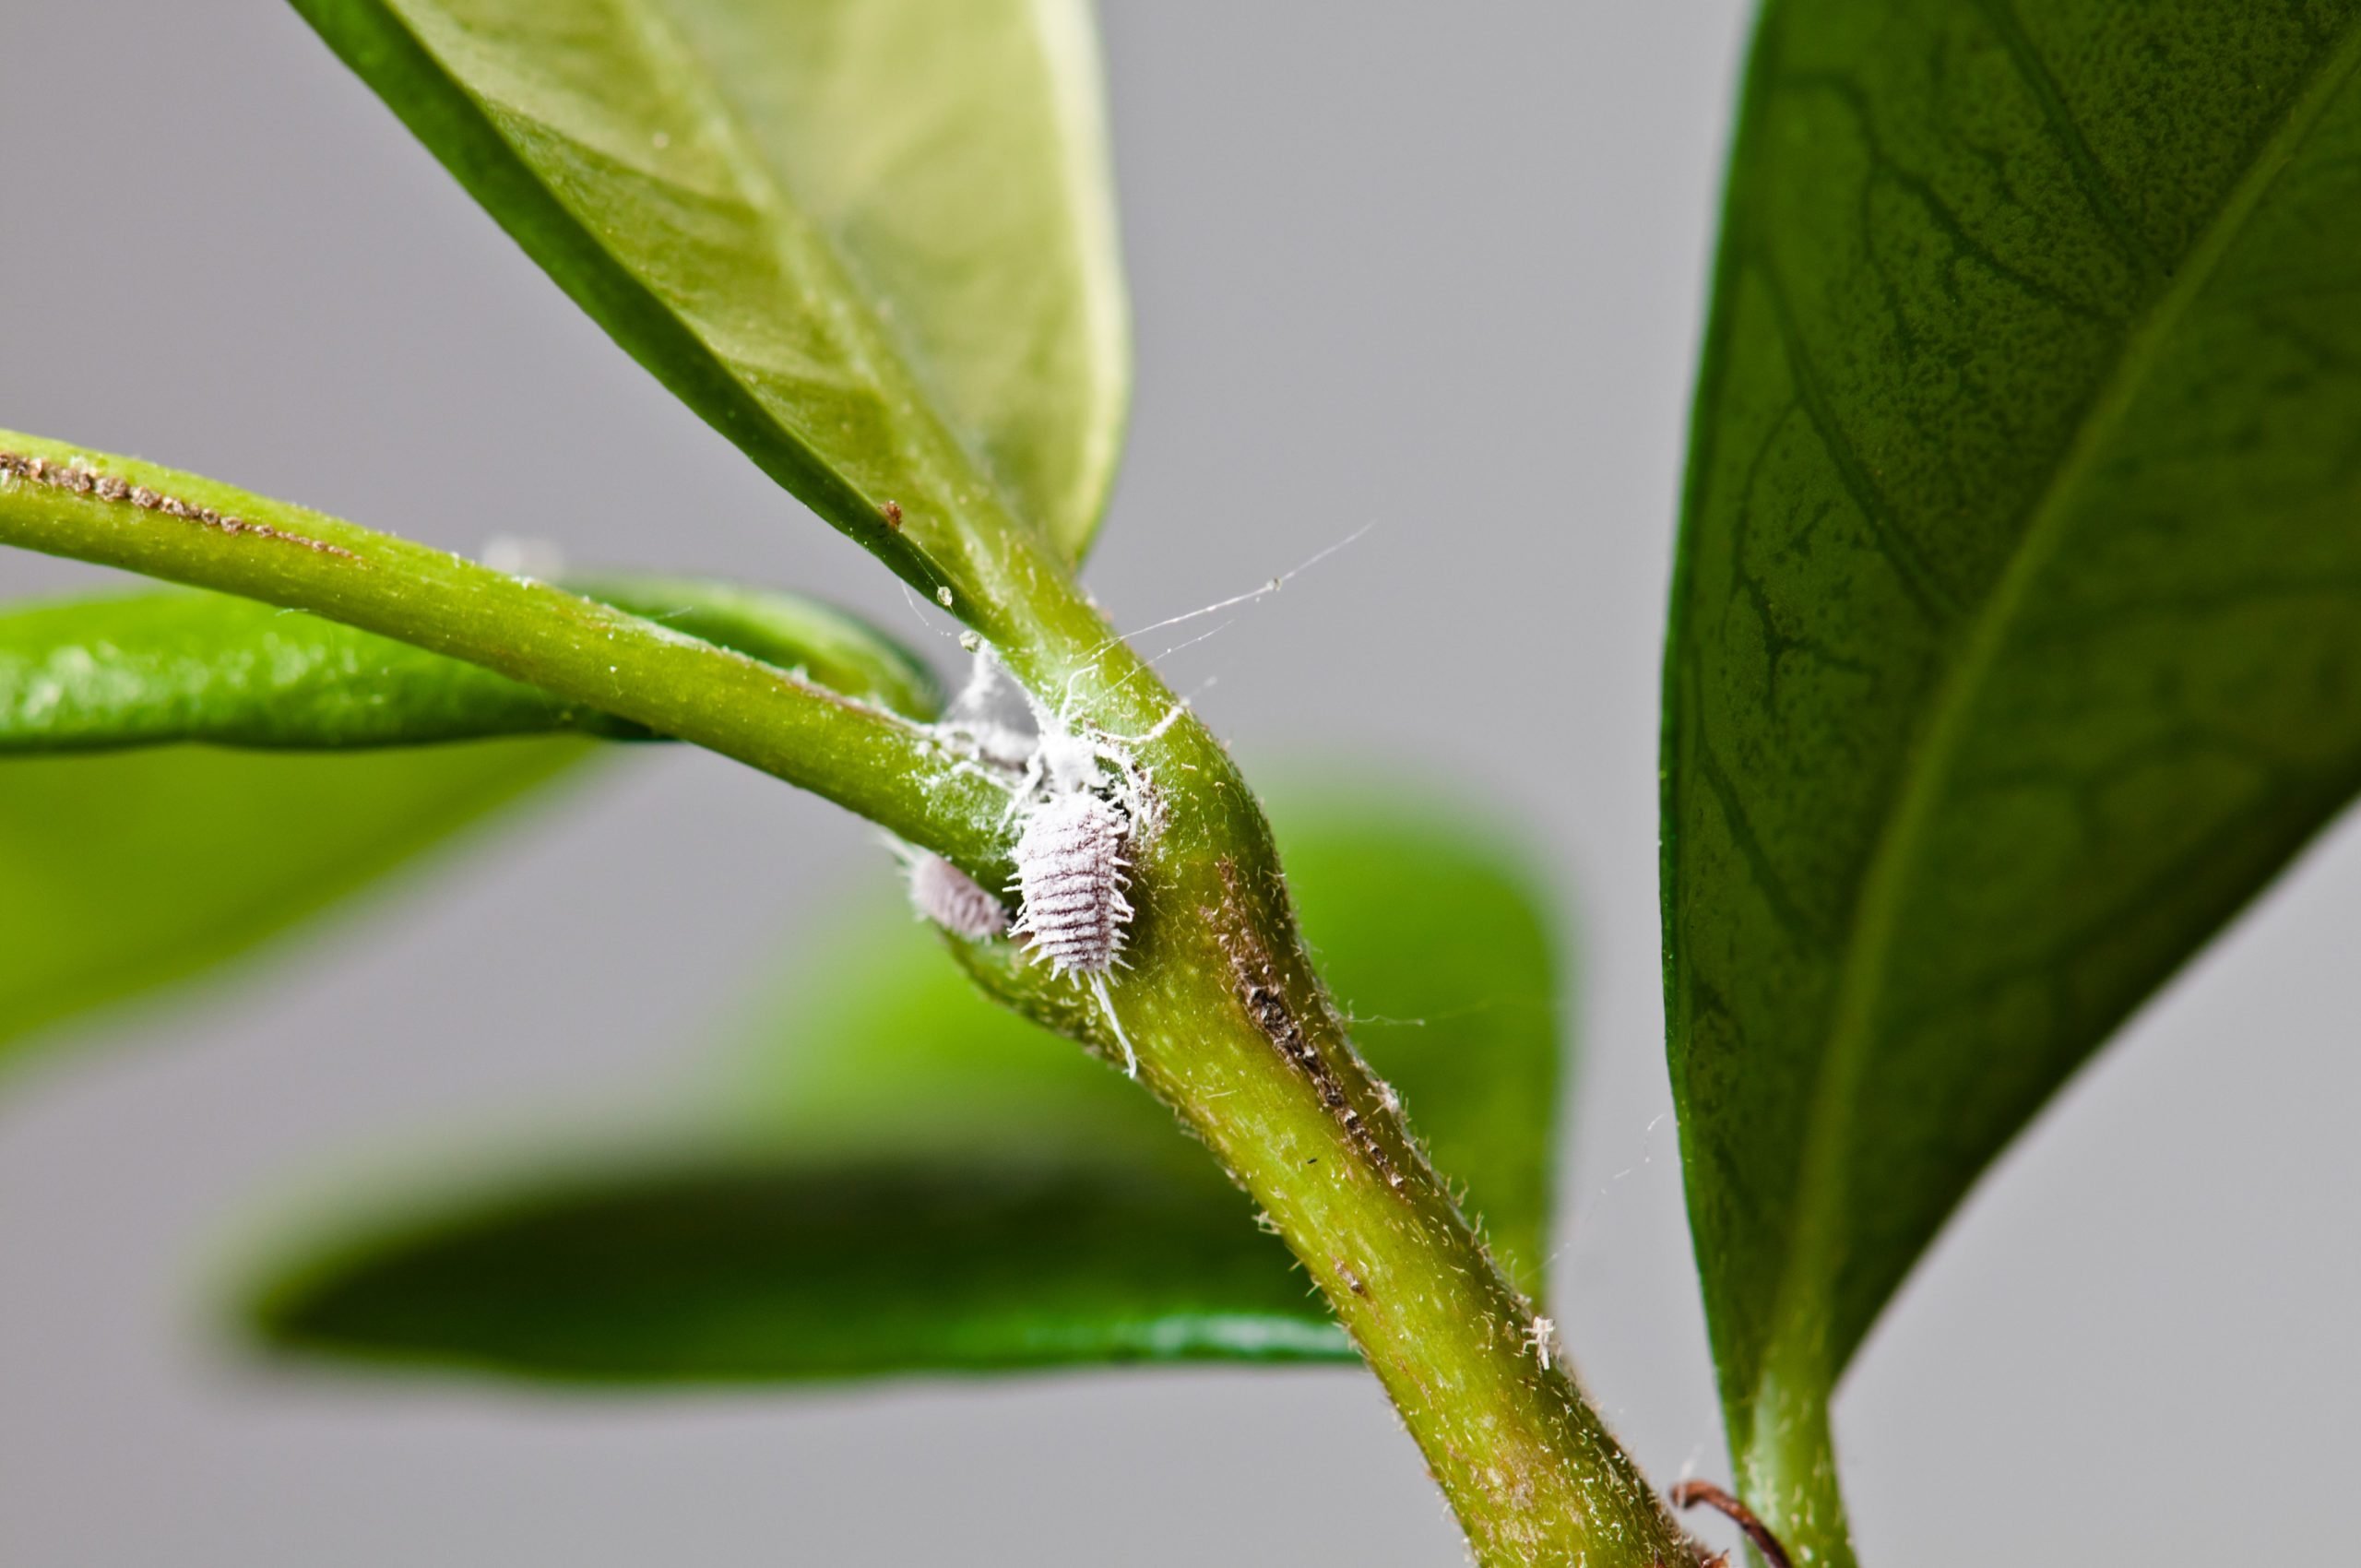 How to Get Rid of Mealybugs and Scale Insects on Plants